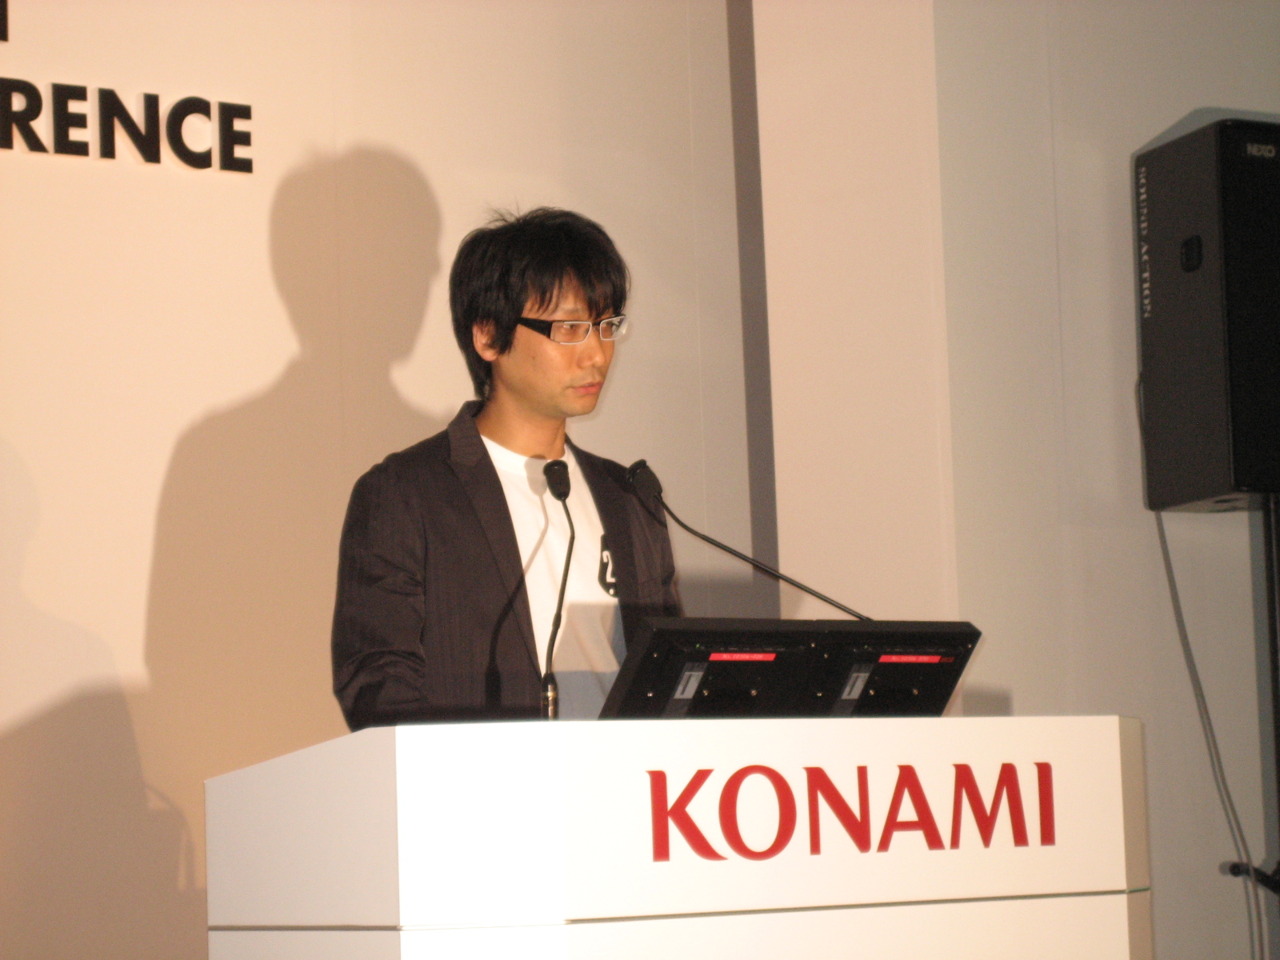 Hideo Kojima takes the stage to talk a whole lot about Metal Gear.